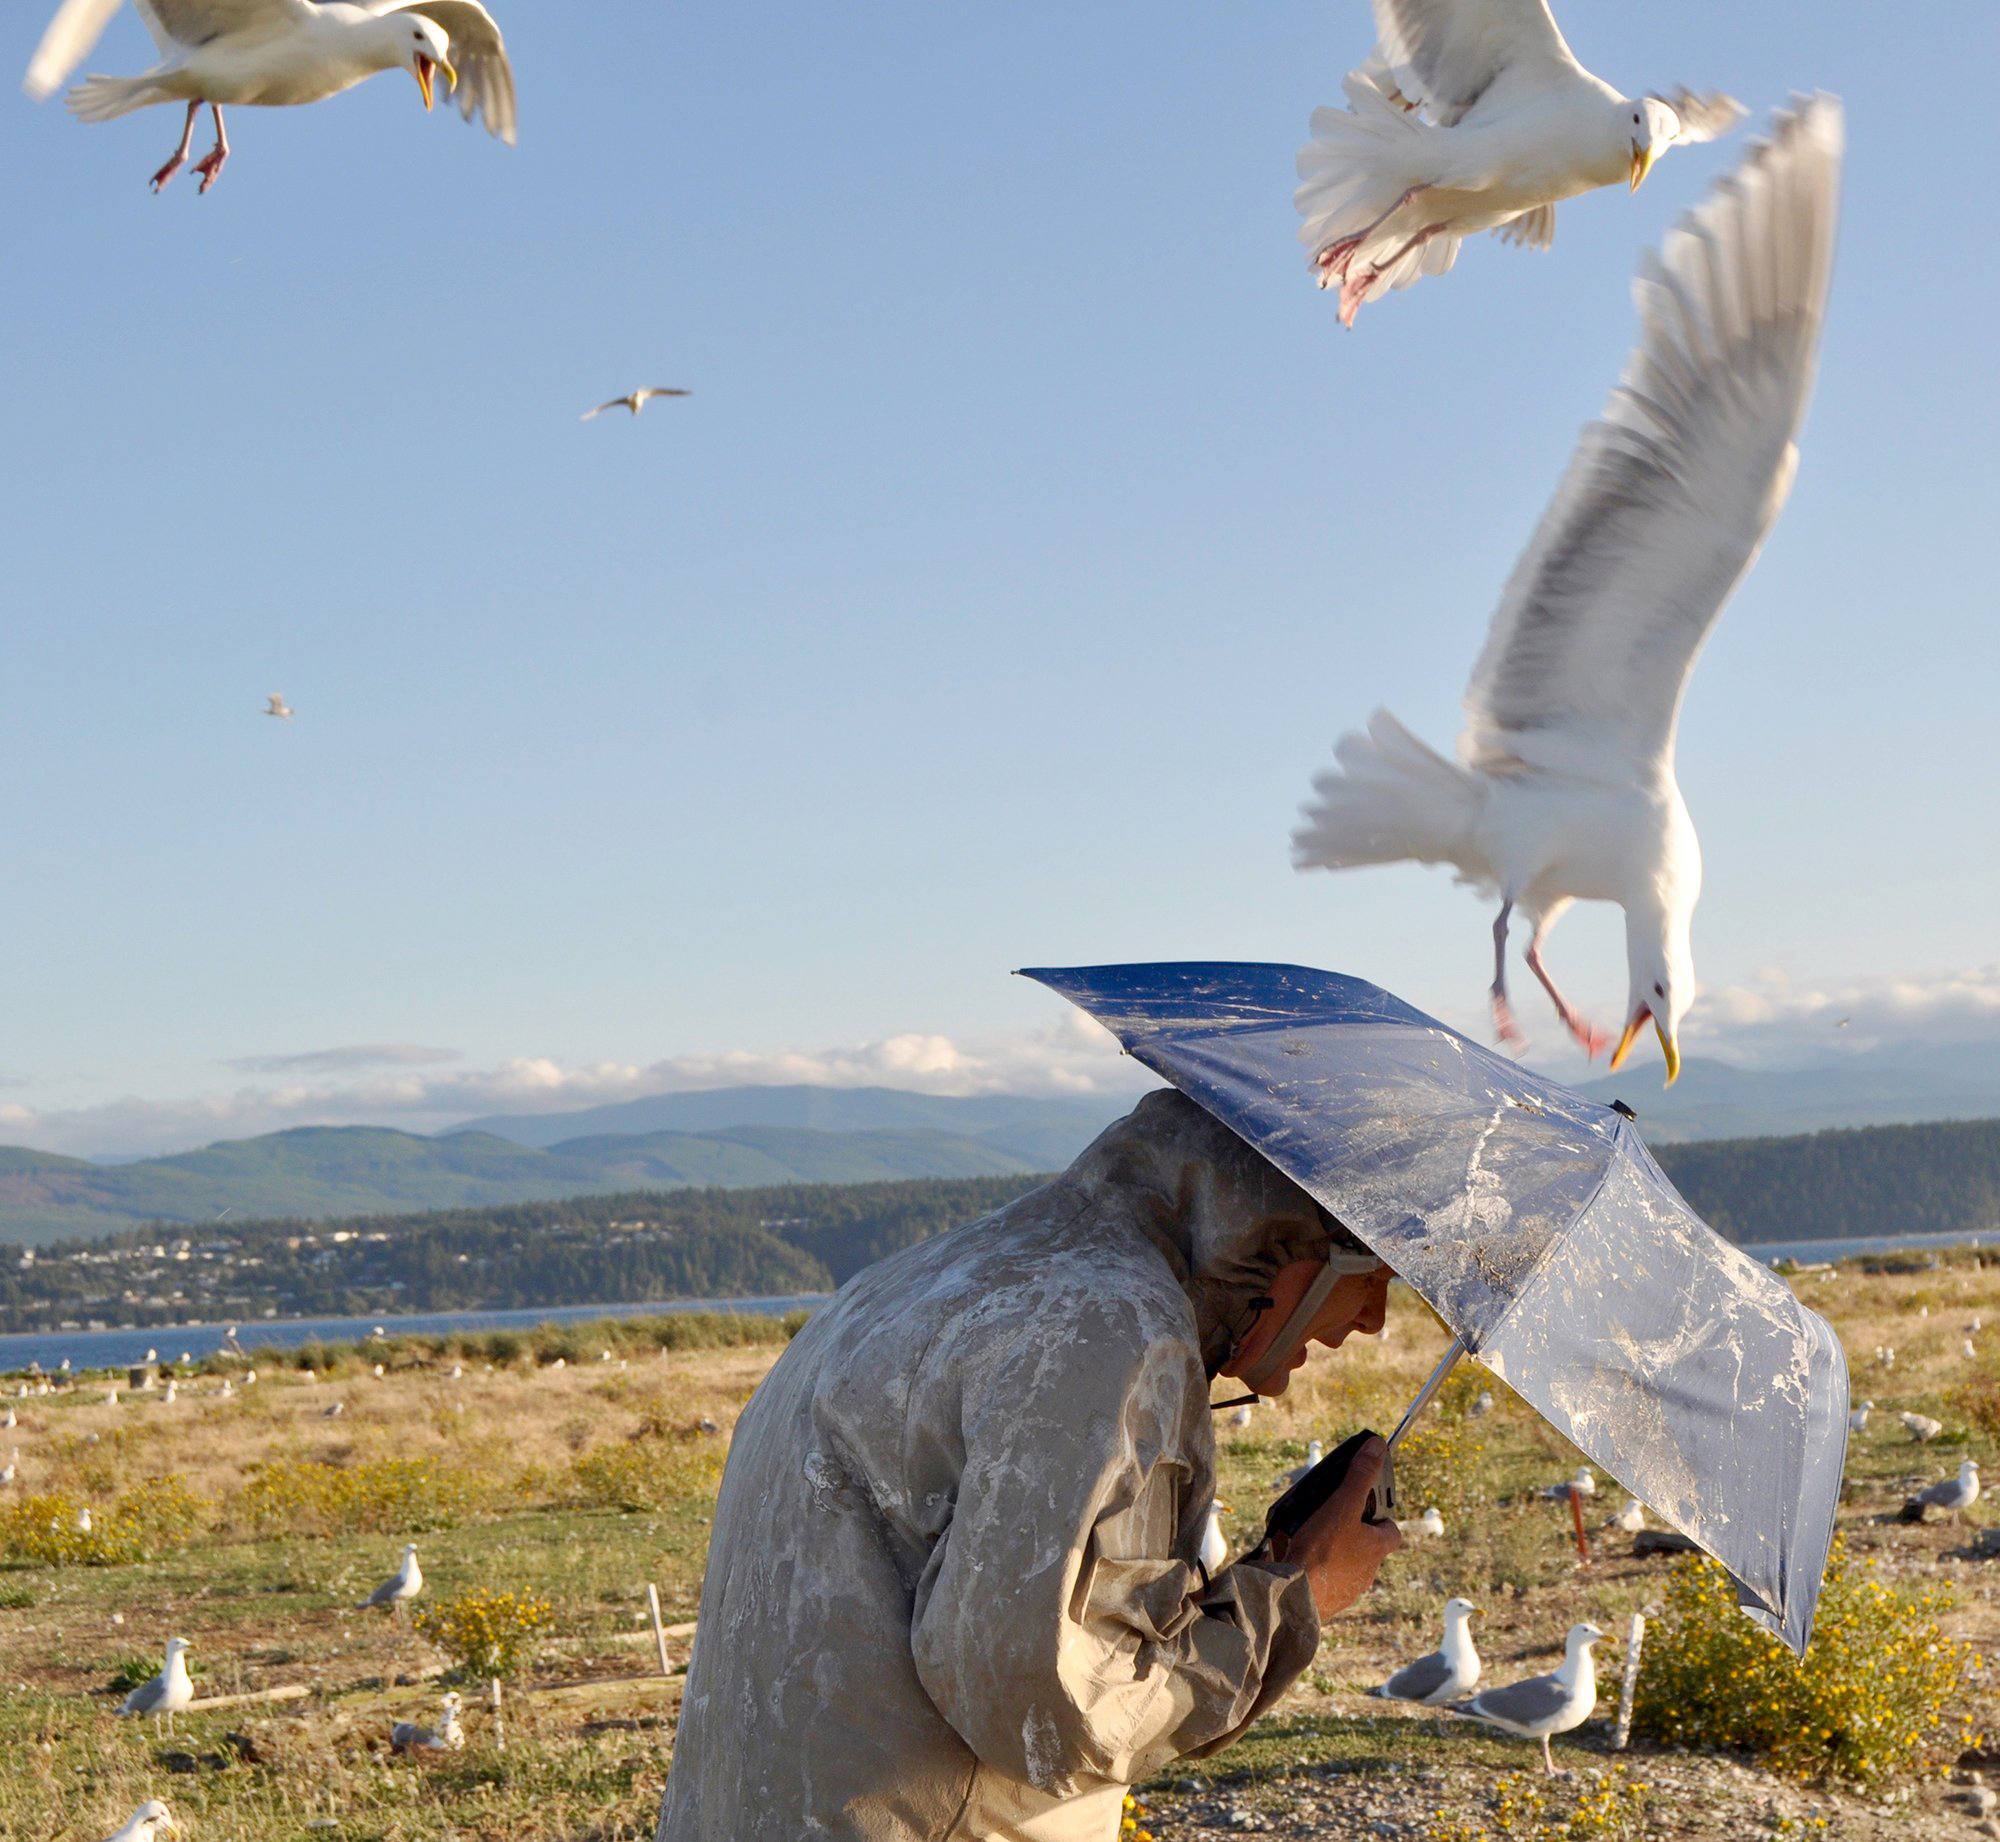 Tristan Baurick/Kitsap Sun via AP                                In this photo taken on July 13, 2016, biologist Jim Hayward shields himself with an umbrella while visiting a large gull nesting colony on Protection Island, a wildlife refuge in the Strait of Juan de Fuca, near Port Townsend.